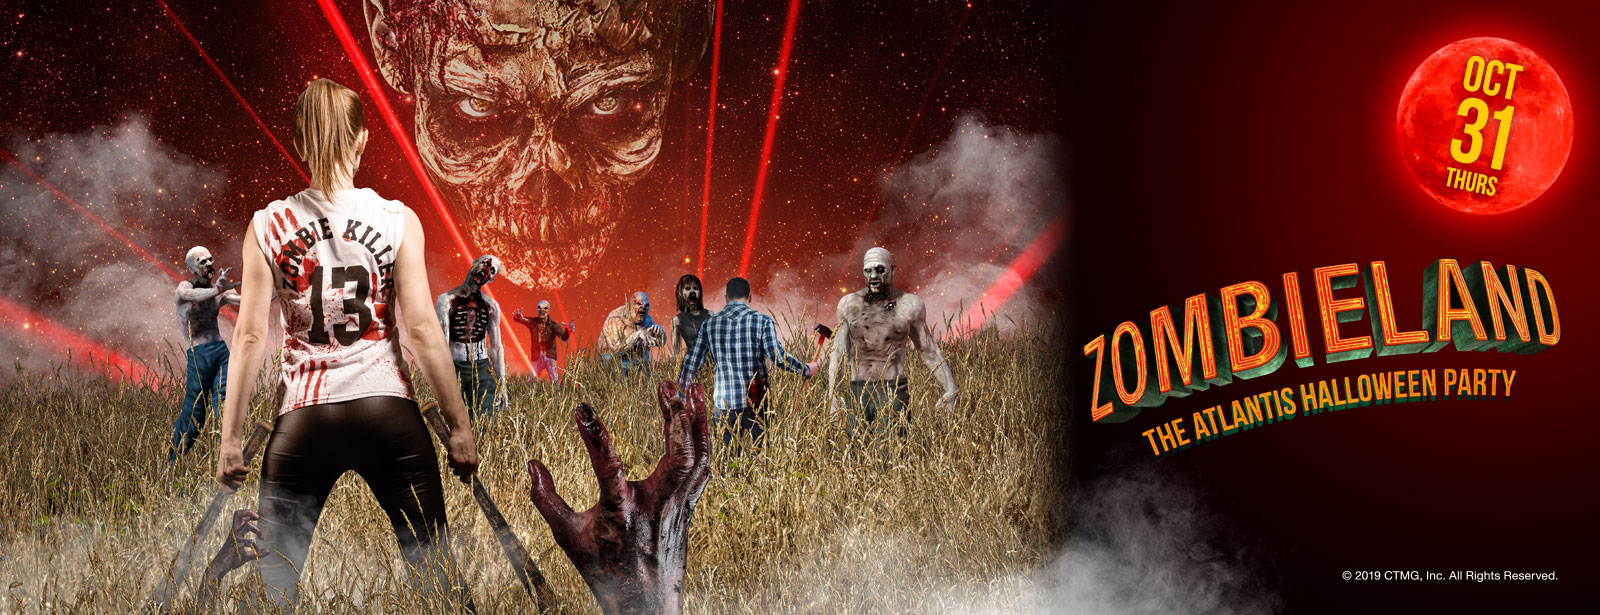 Zombieland Halloween at Atlantis The Palm - Coming Soon in UAE